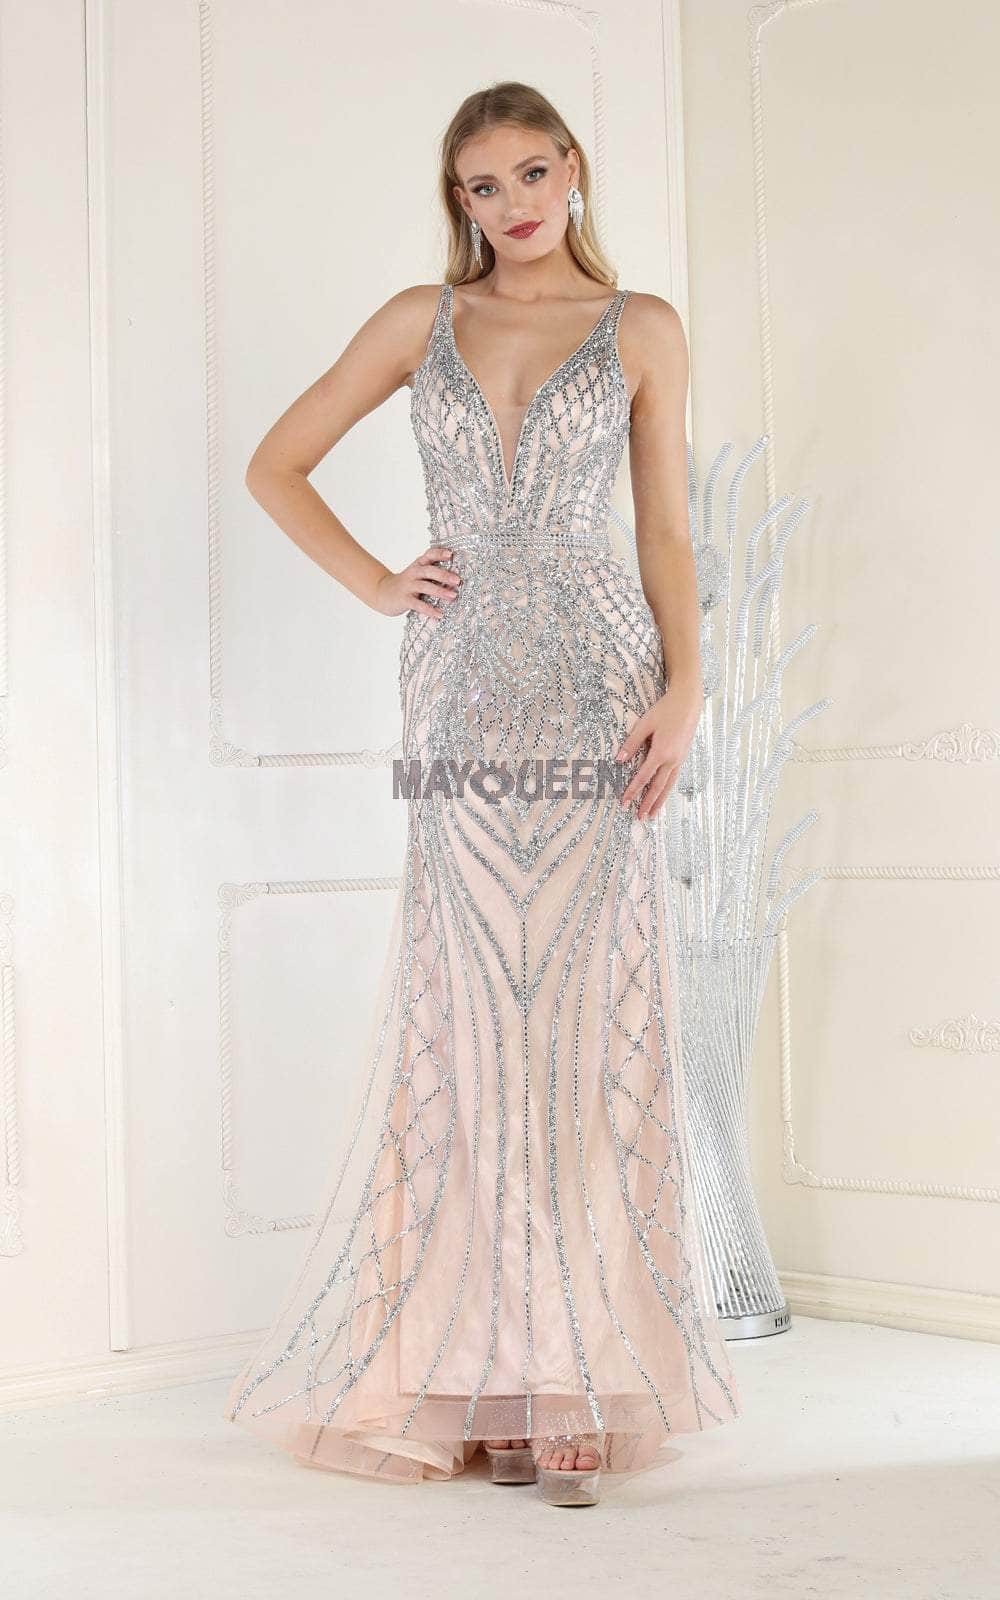 Image of May Queen RQ7931 - Beaded Sleeveless Evening Dress